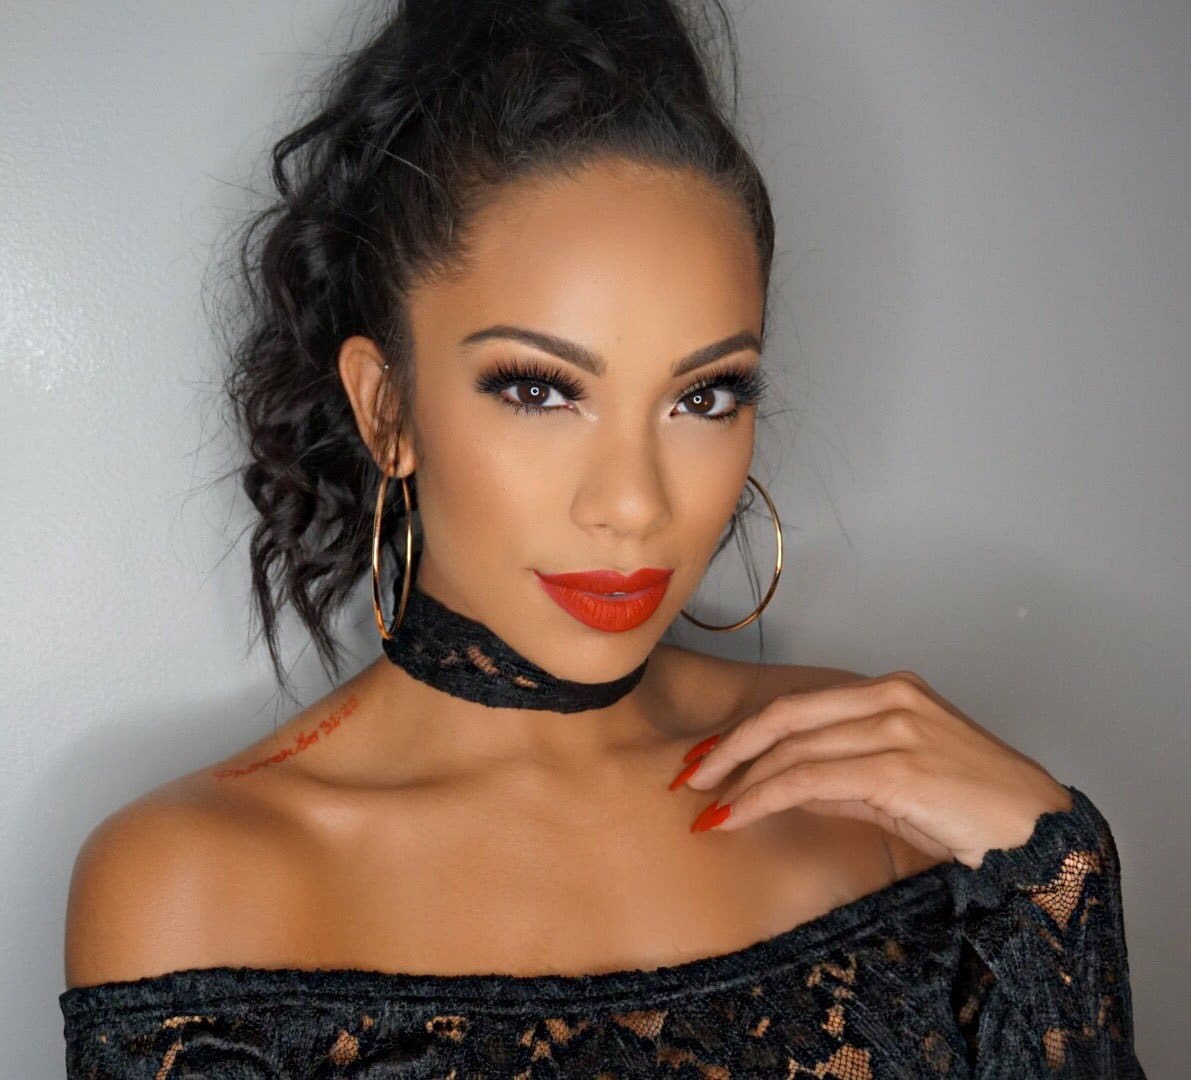 Erica Mena Puts Her Best Asset On Display And Safaree Cannot Remain Quiet - See His Comments